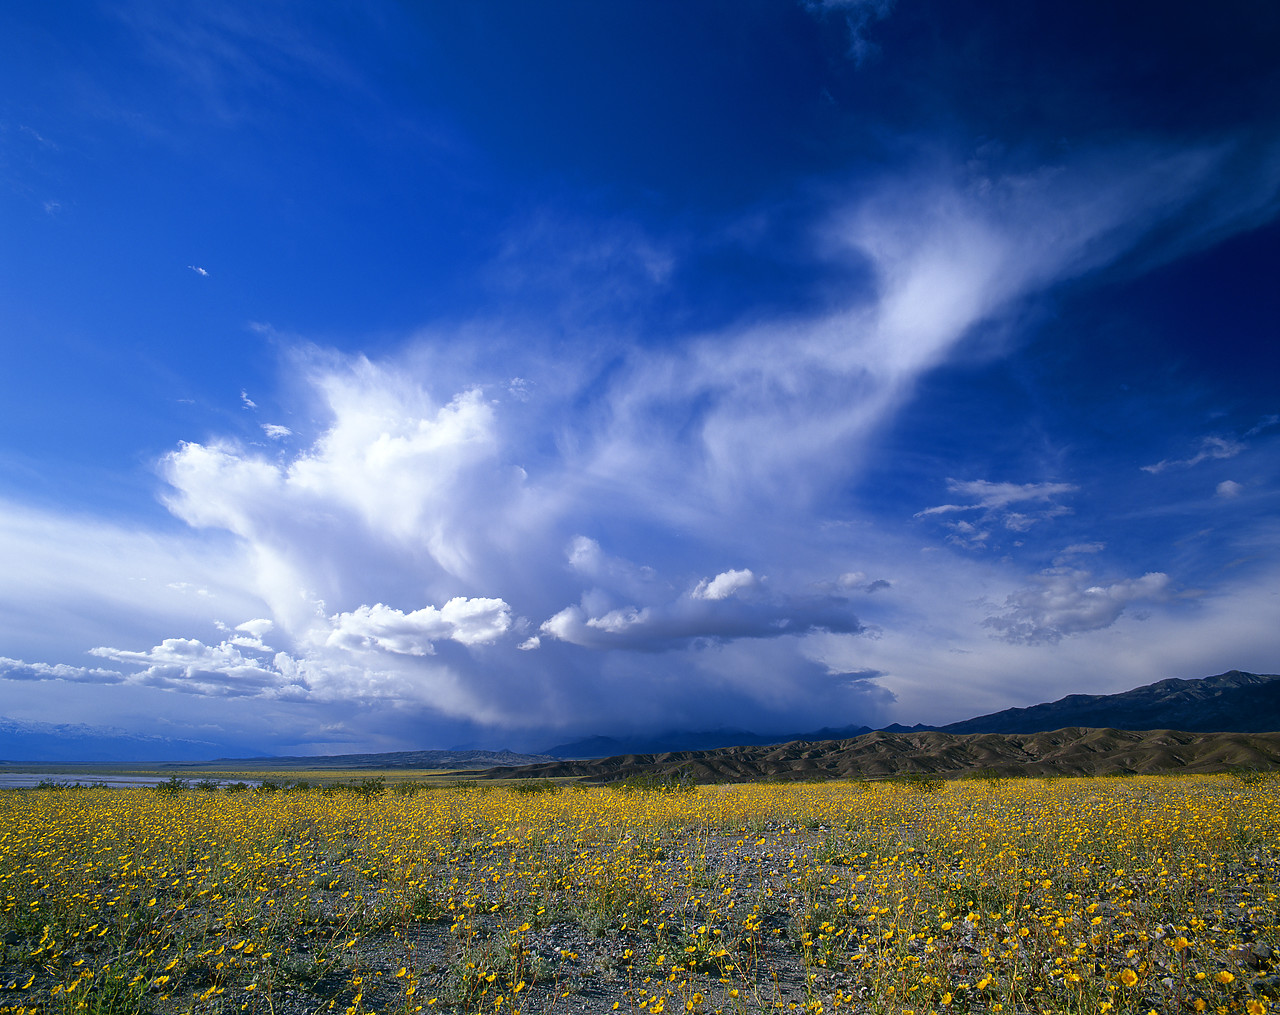 #980502-6 - Cloud Formation over Desert Wildflowers, Death Valley National Park, California, USA